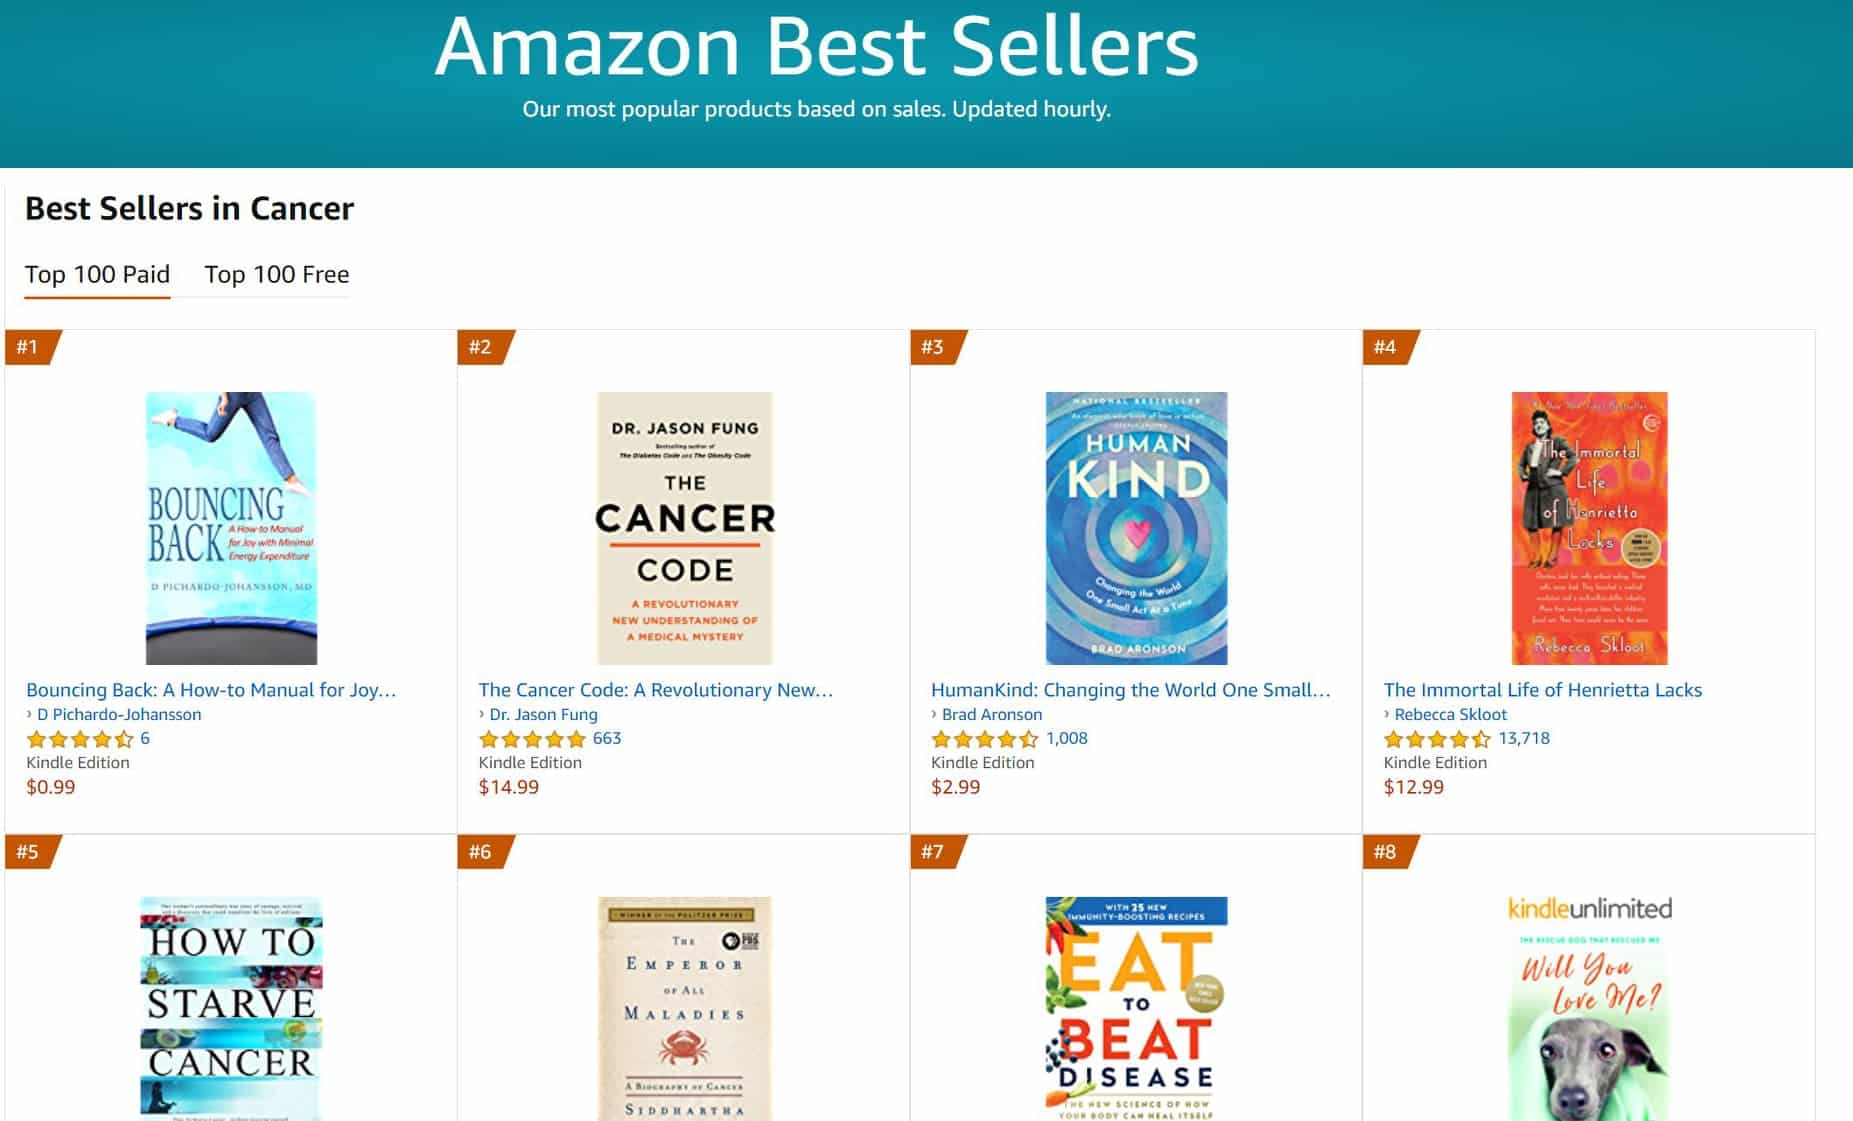 Congrats to Diely Pichardo Johansson MD. Life Coach for hitting 1 Amazon Best Seller | Mindstir Media Book Cover